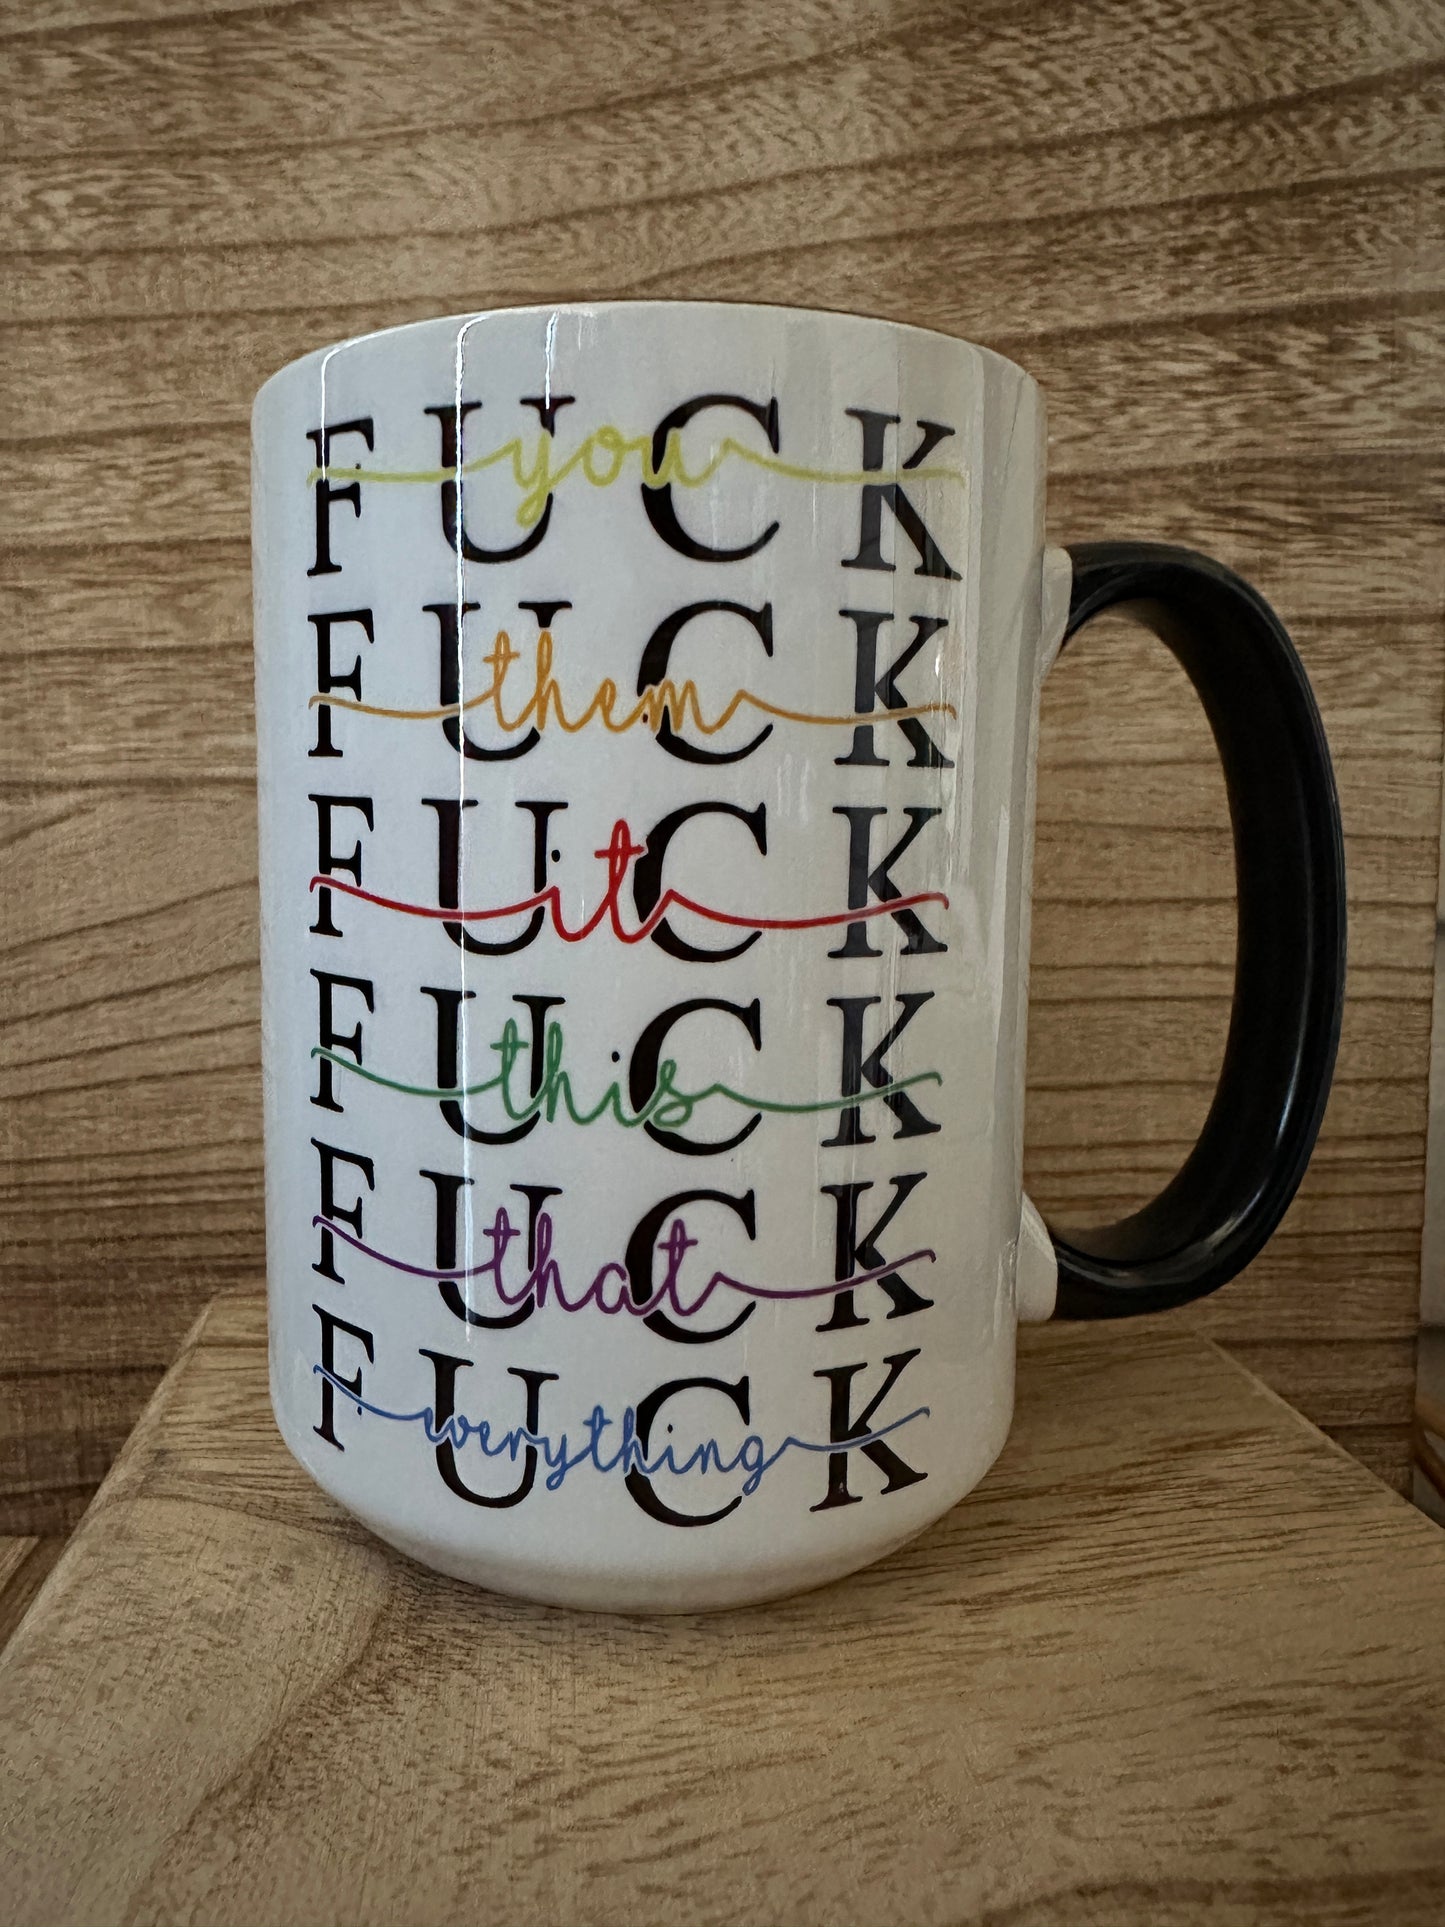 "Fuck" is the most versatile word (multi-color) 15oz Coffee Cup